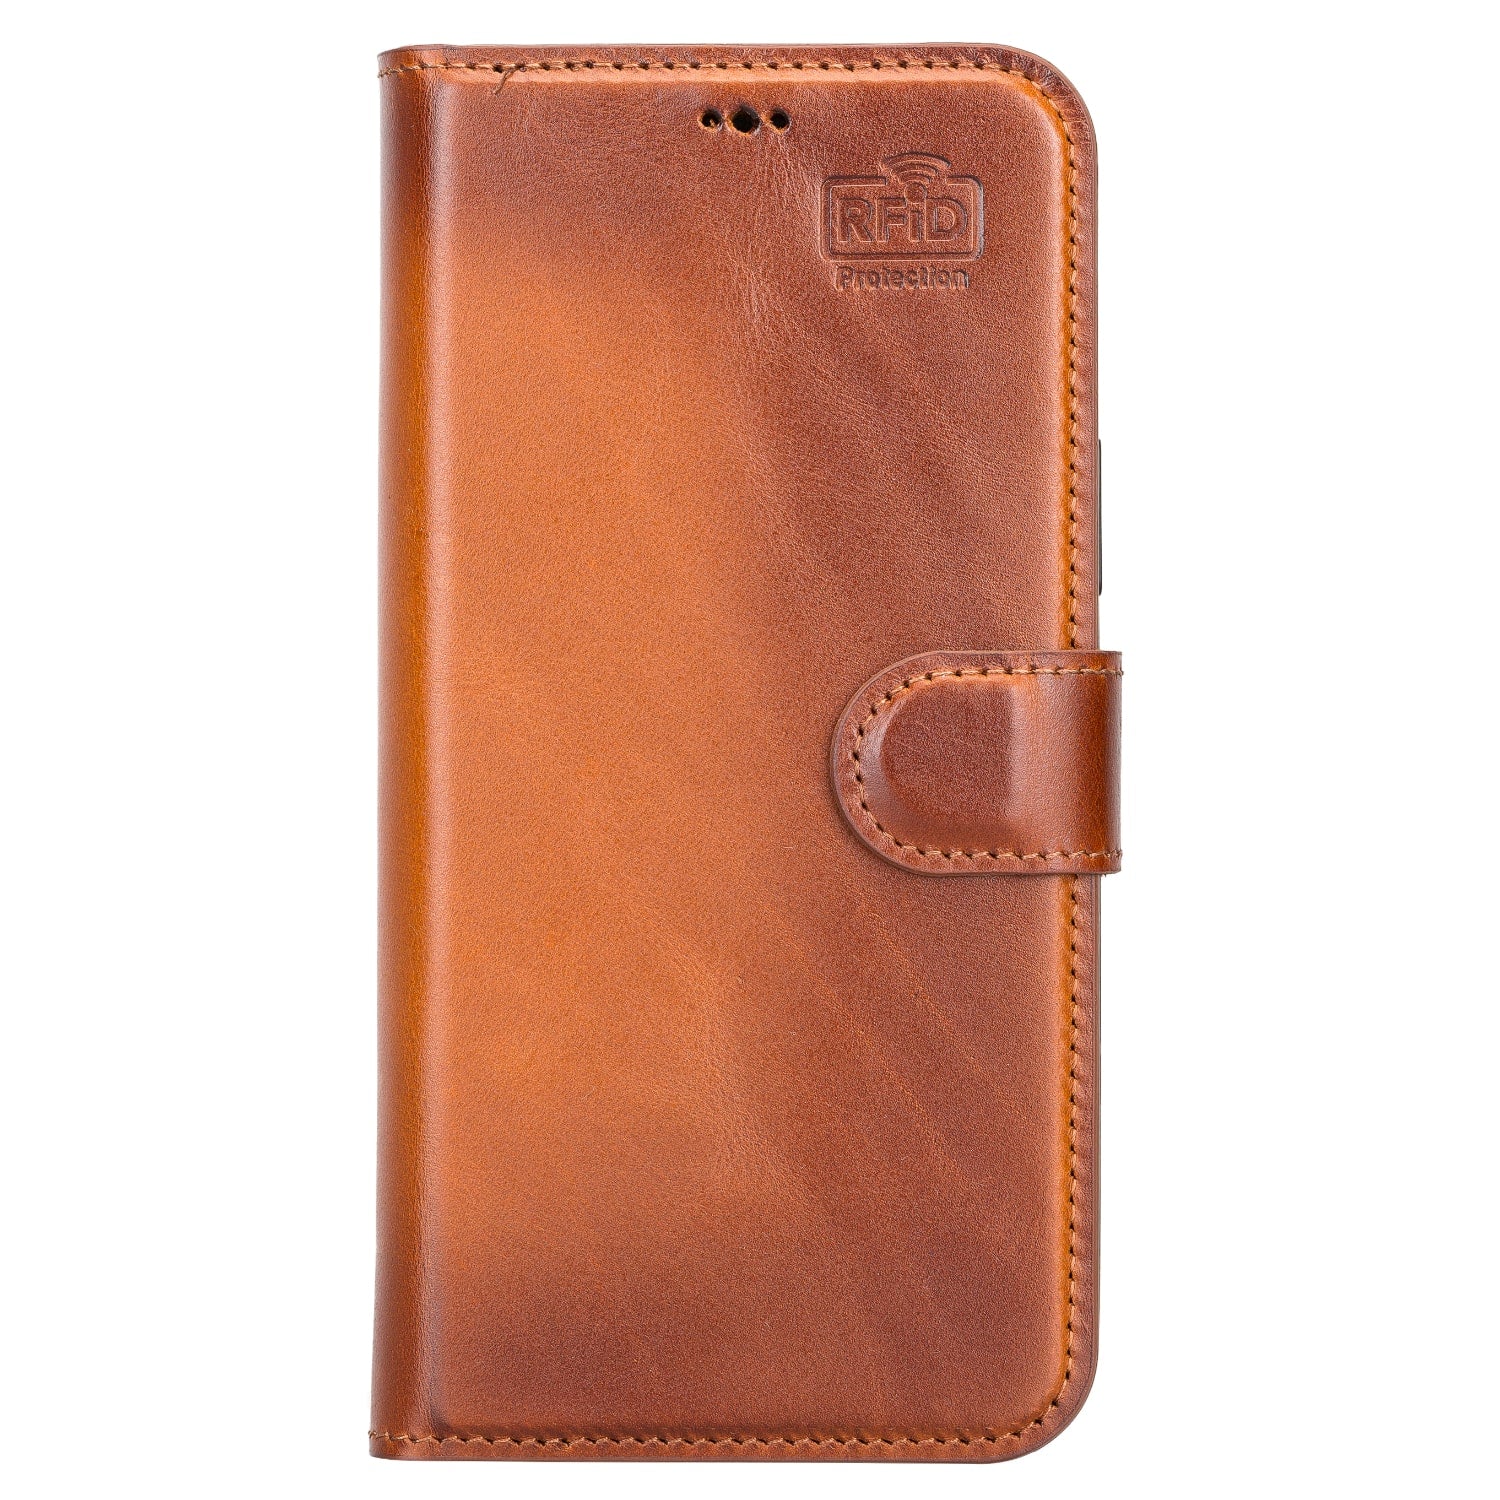 CaseMe iPhone 13 Pro Max Leather Zipper Wallet Case with RFID Blocking  Credit Card Holder Brown